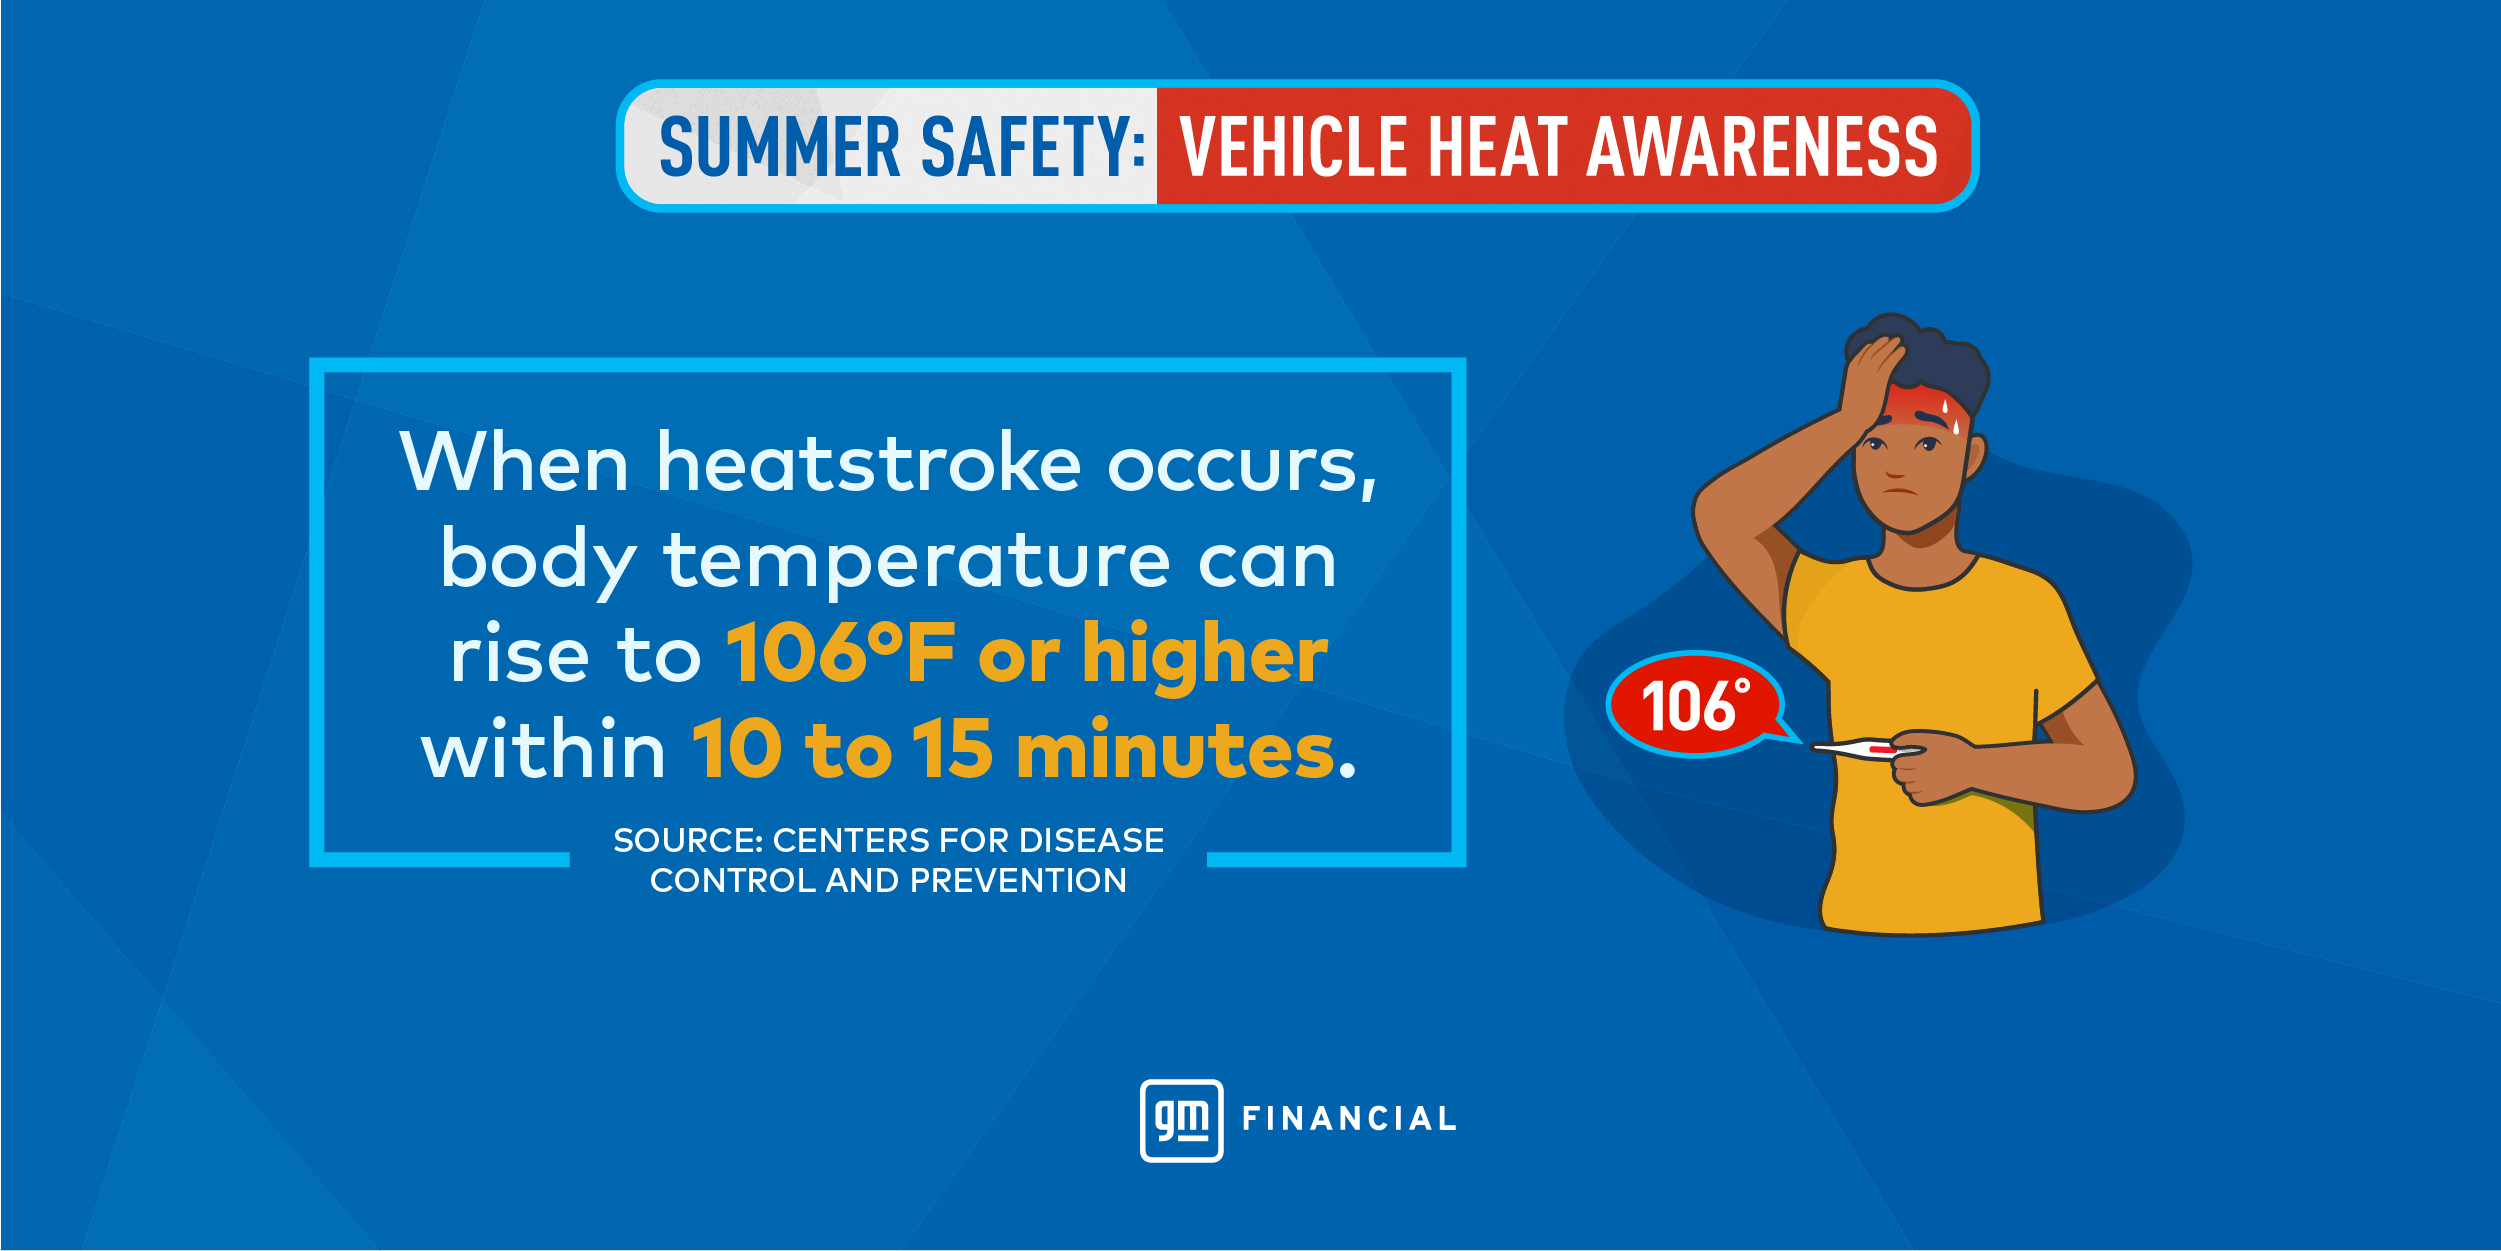 When heatstroke occurs, body temps can rise to 106 F or higher in 10-15 minutes.